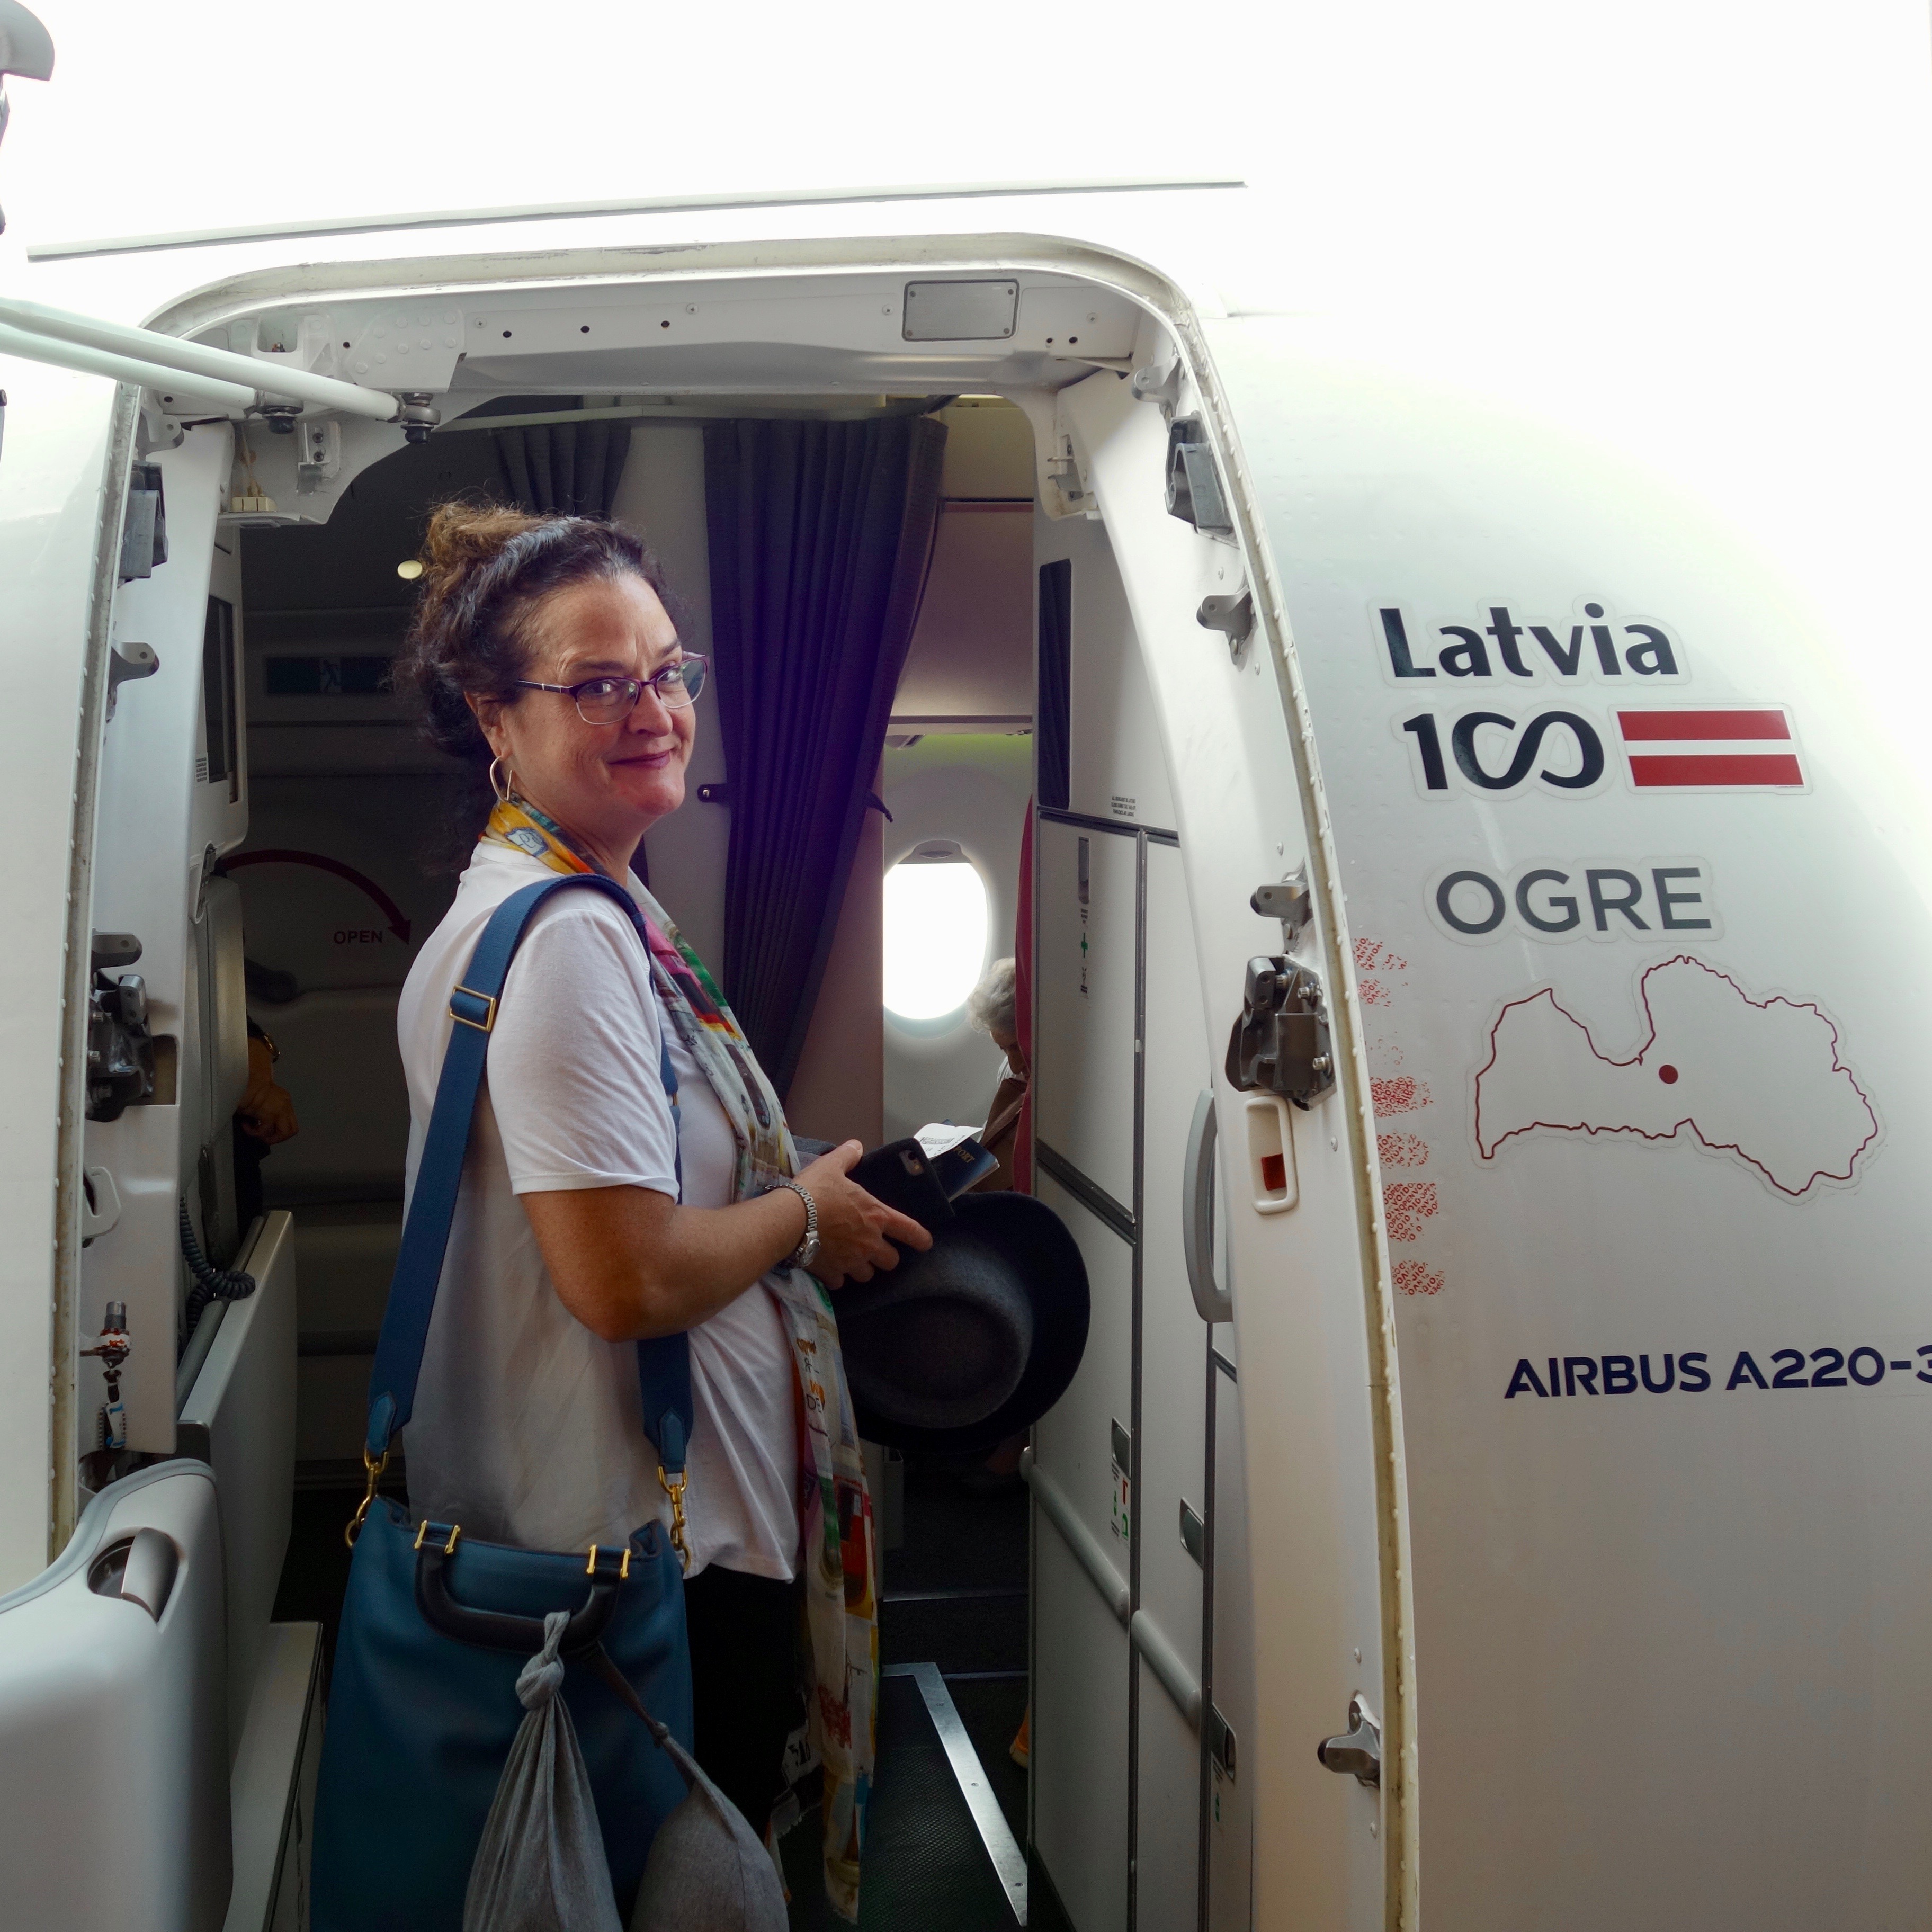 A female passenger boards through the front main cabin door of an airBaltic Airbus A220.  The outside of the fuselage shows a few different stickers highlighting the airframe type and a map of Latvia.  